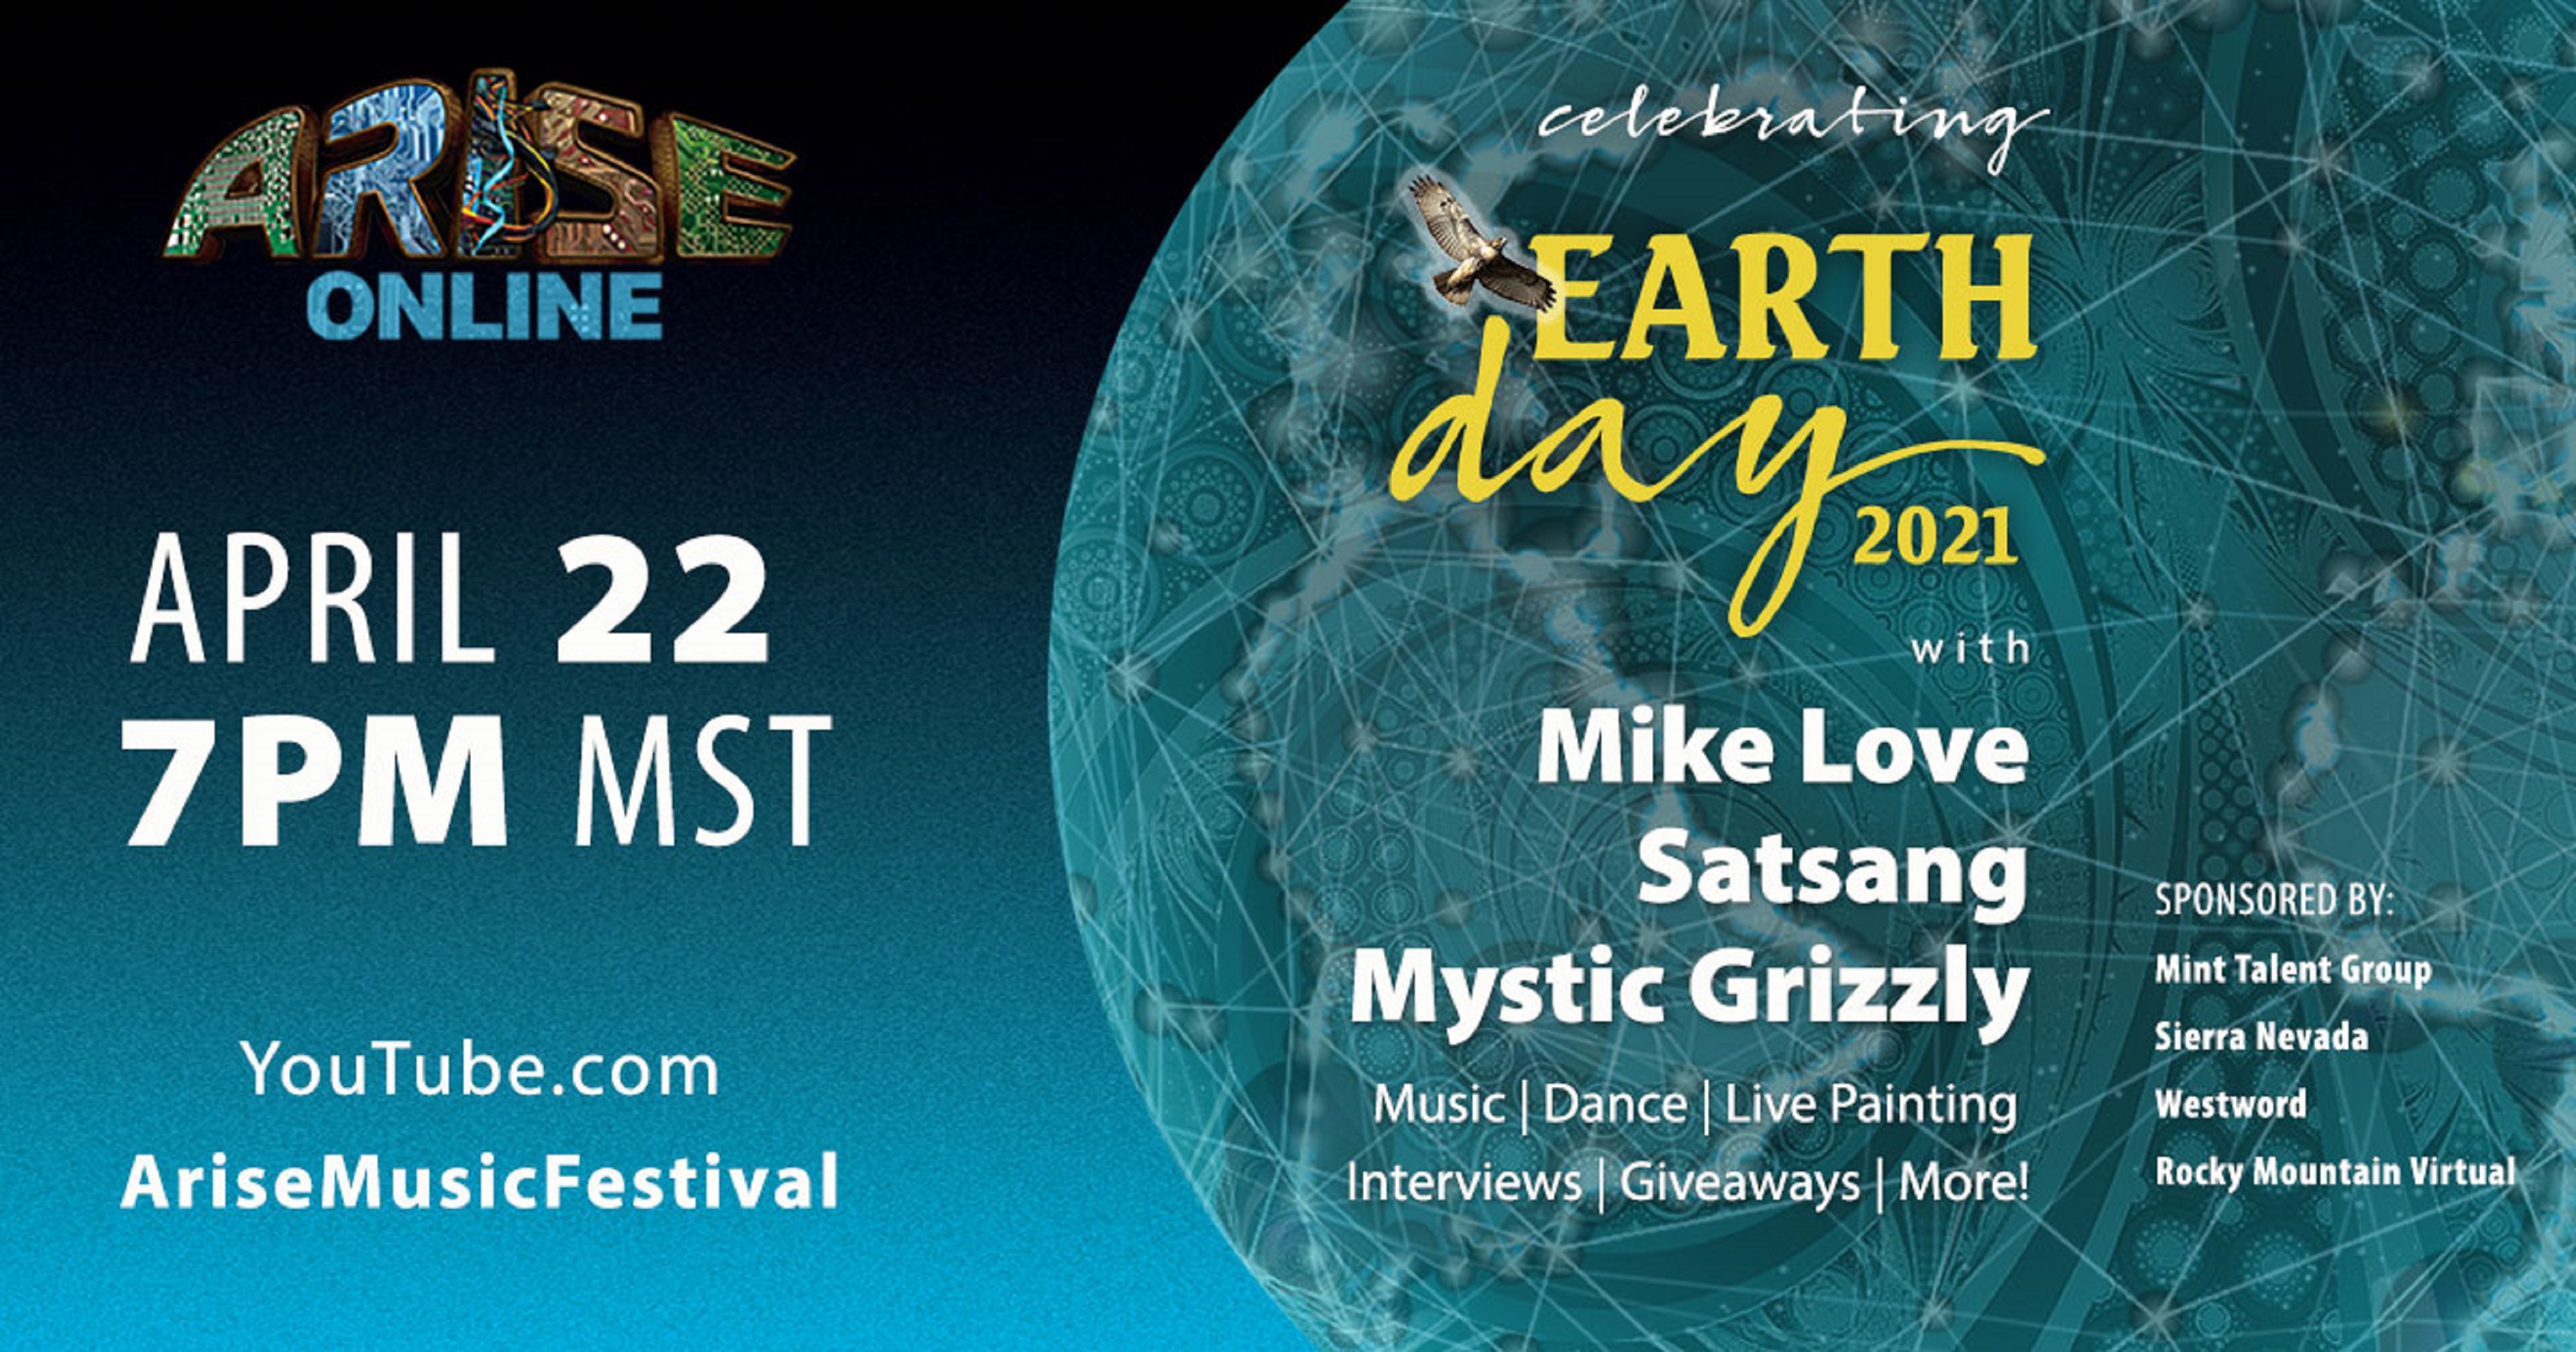 Arise Music Festival teams up with Mike Love, Satsang, Mystic Grizzly and more for ARISE Online: Earth Day 2021